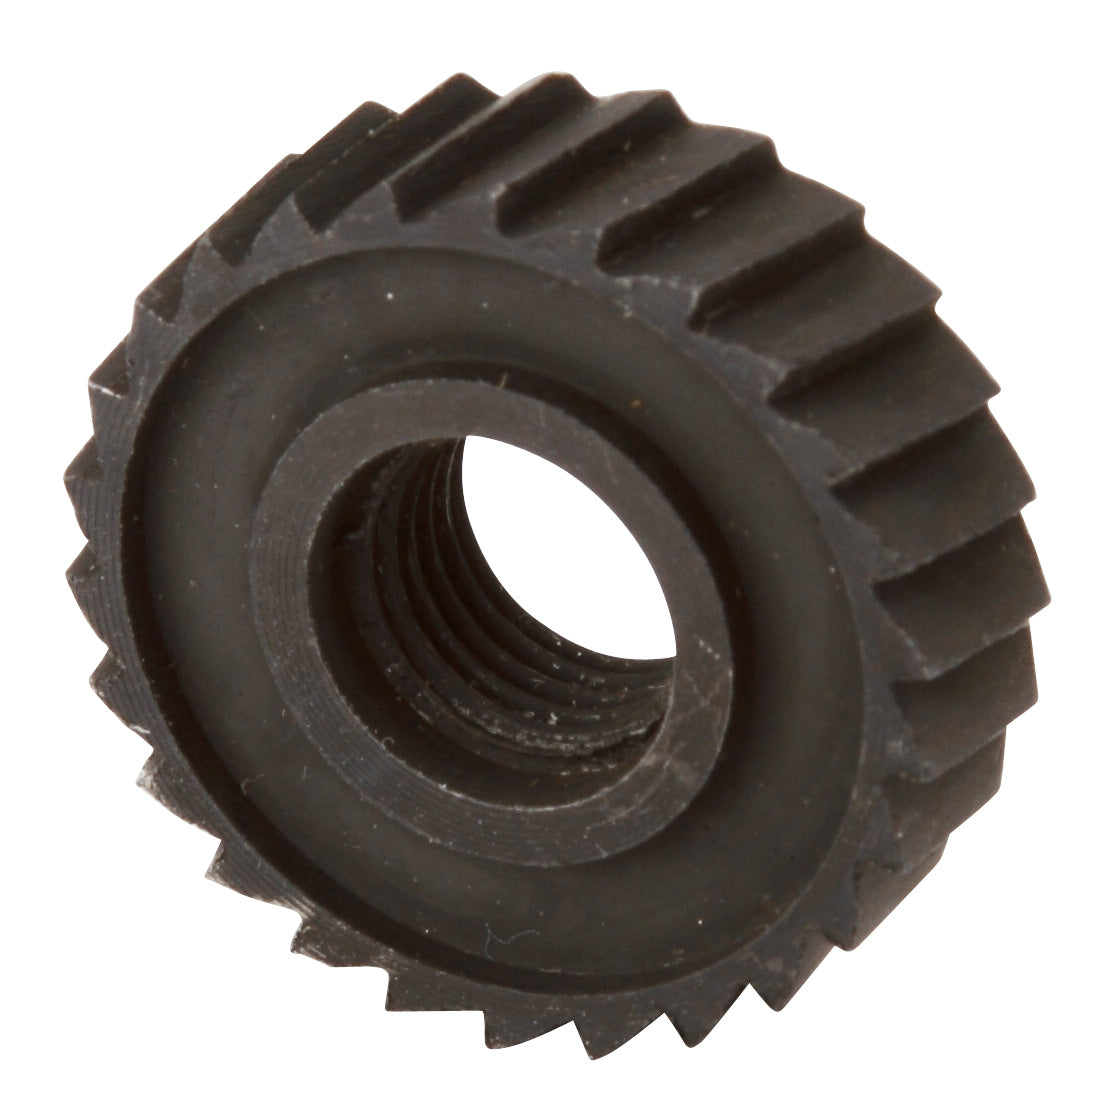 Royal Industries (ROY CO 1 G) Replacement CO 1 Gear